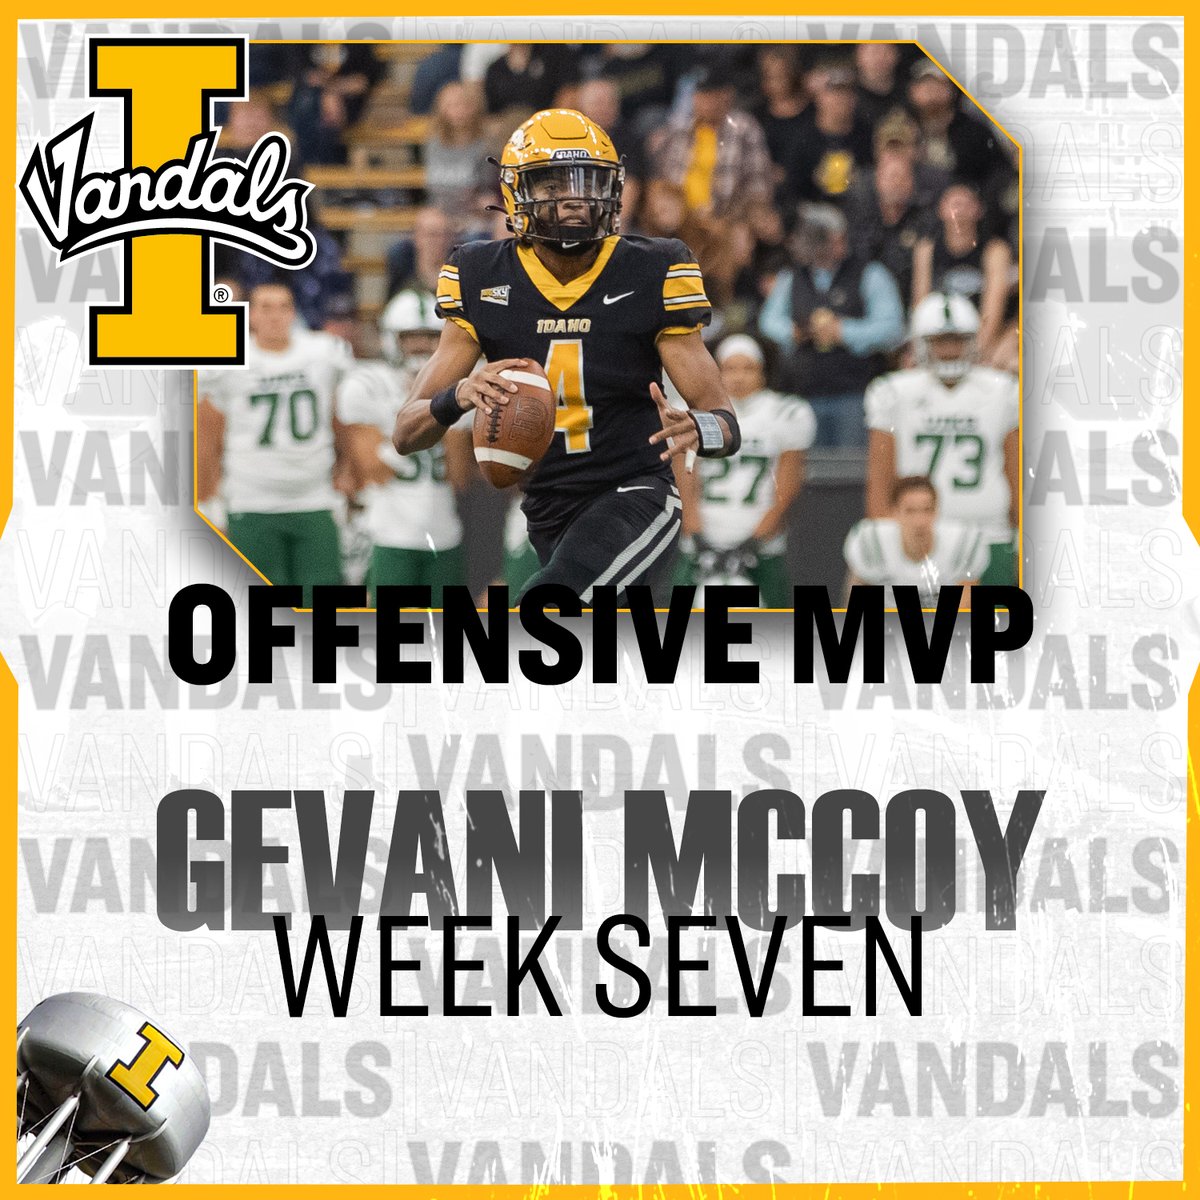 He threw for four touchdowns and caught another! Our game seven offensive MVP is @Gevani_McCoy! #GoVandals